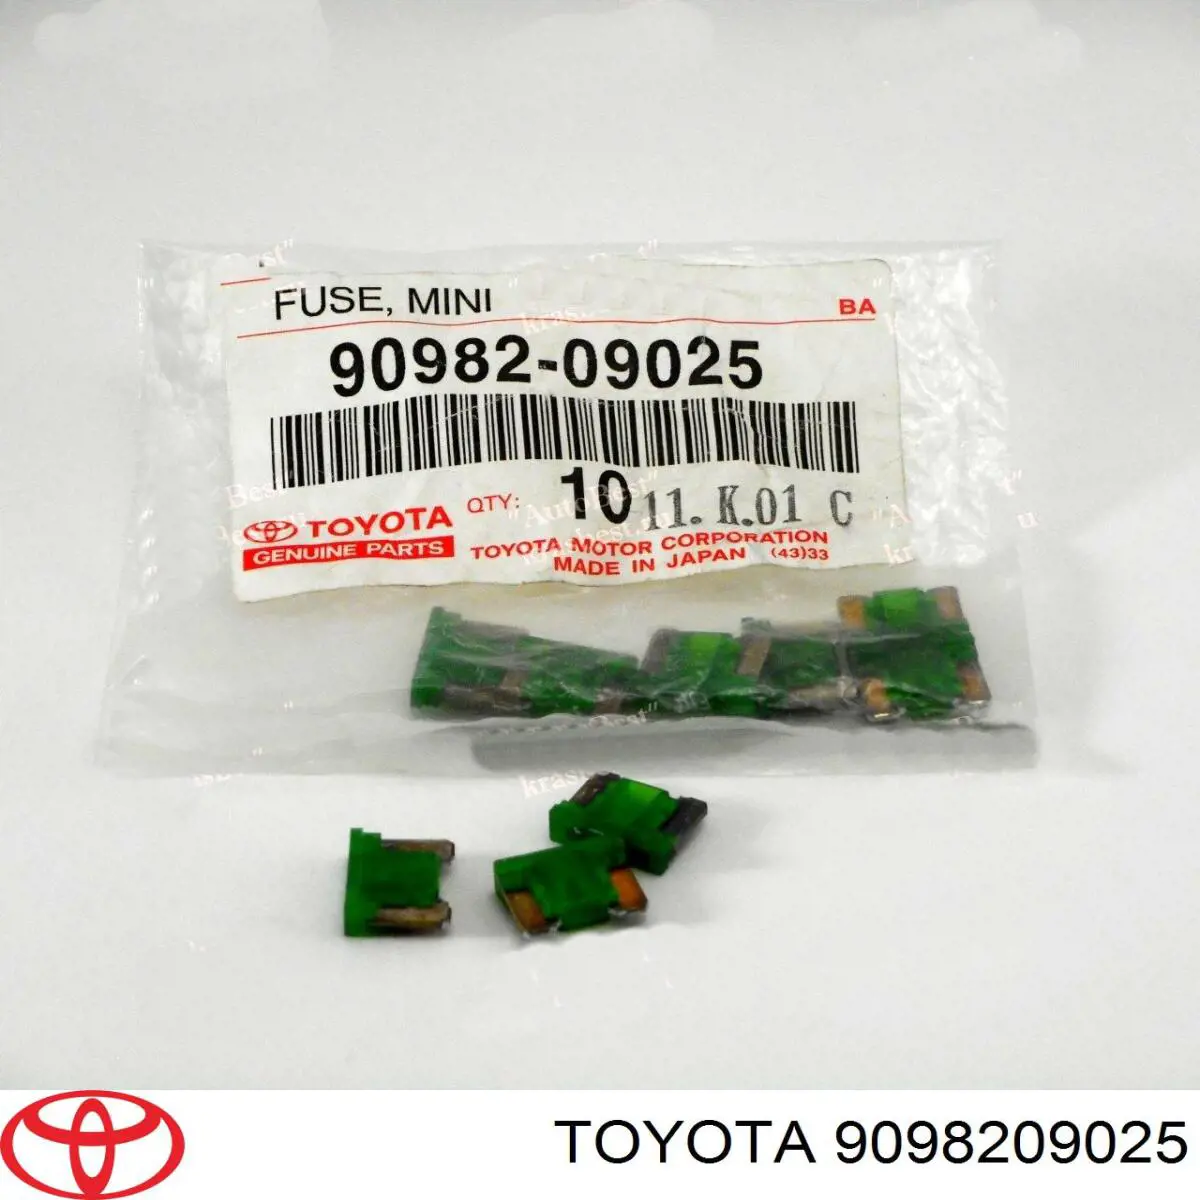 9098209025 Toyota fusible